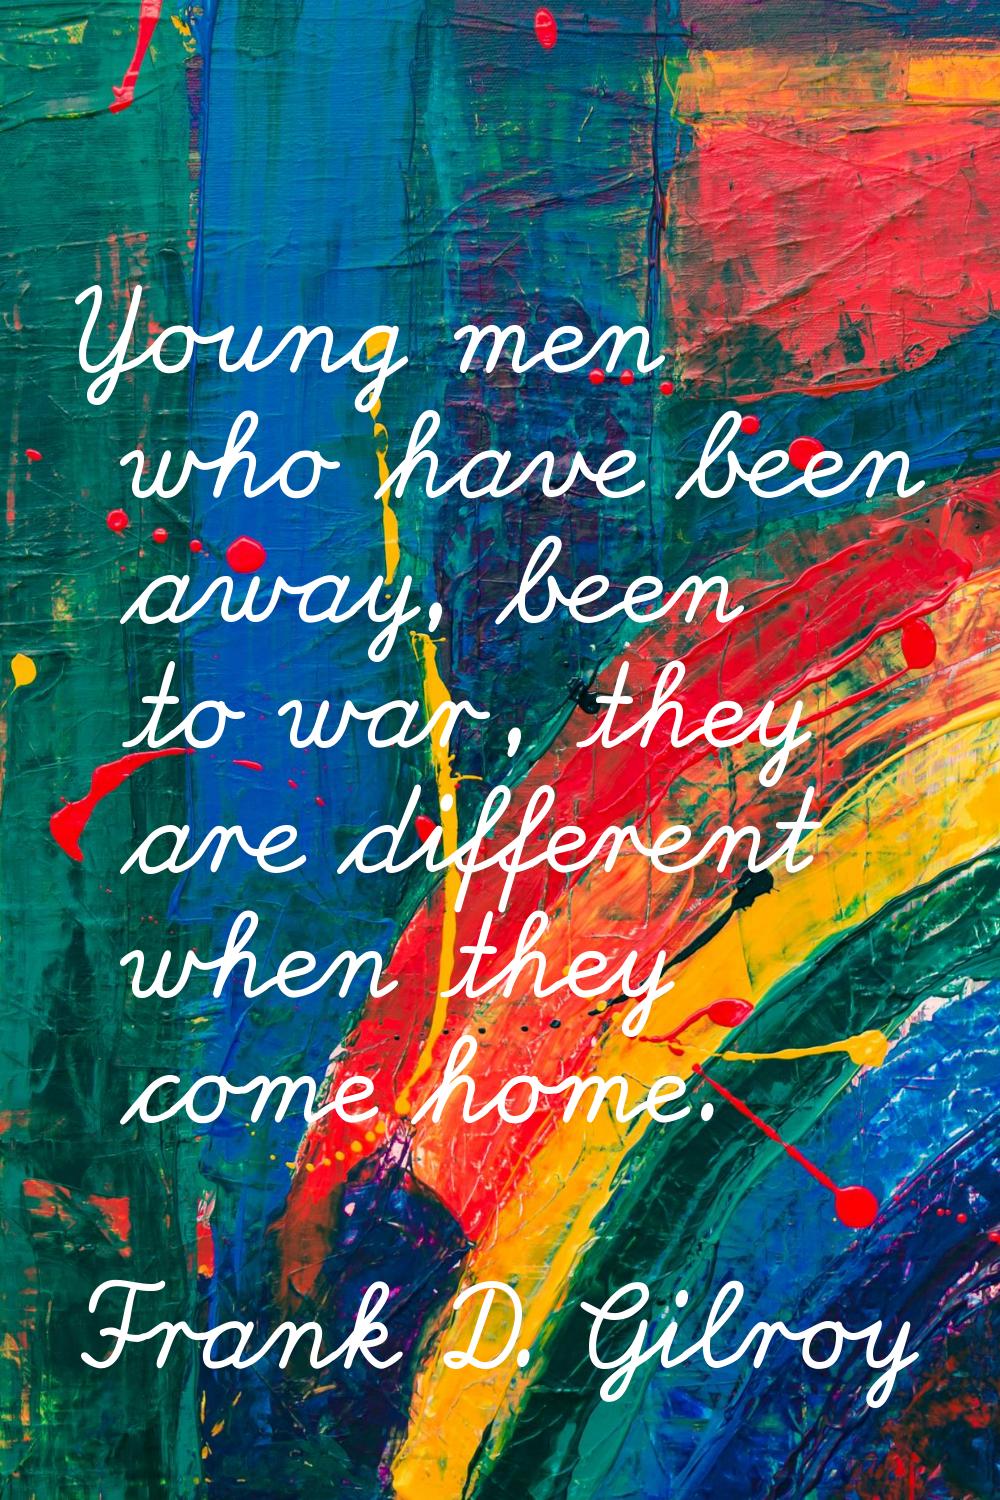 Young men who have been away, been to war, they are different when they come home.